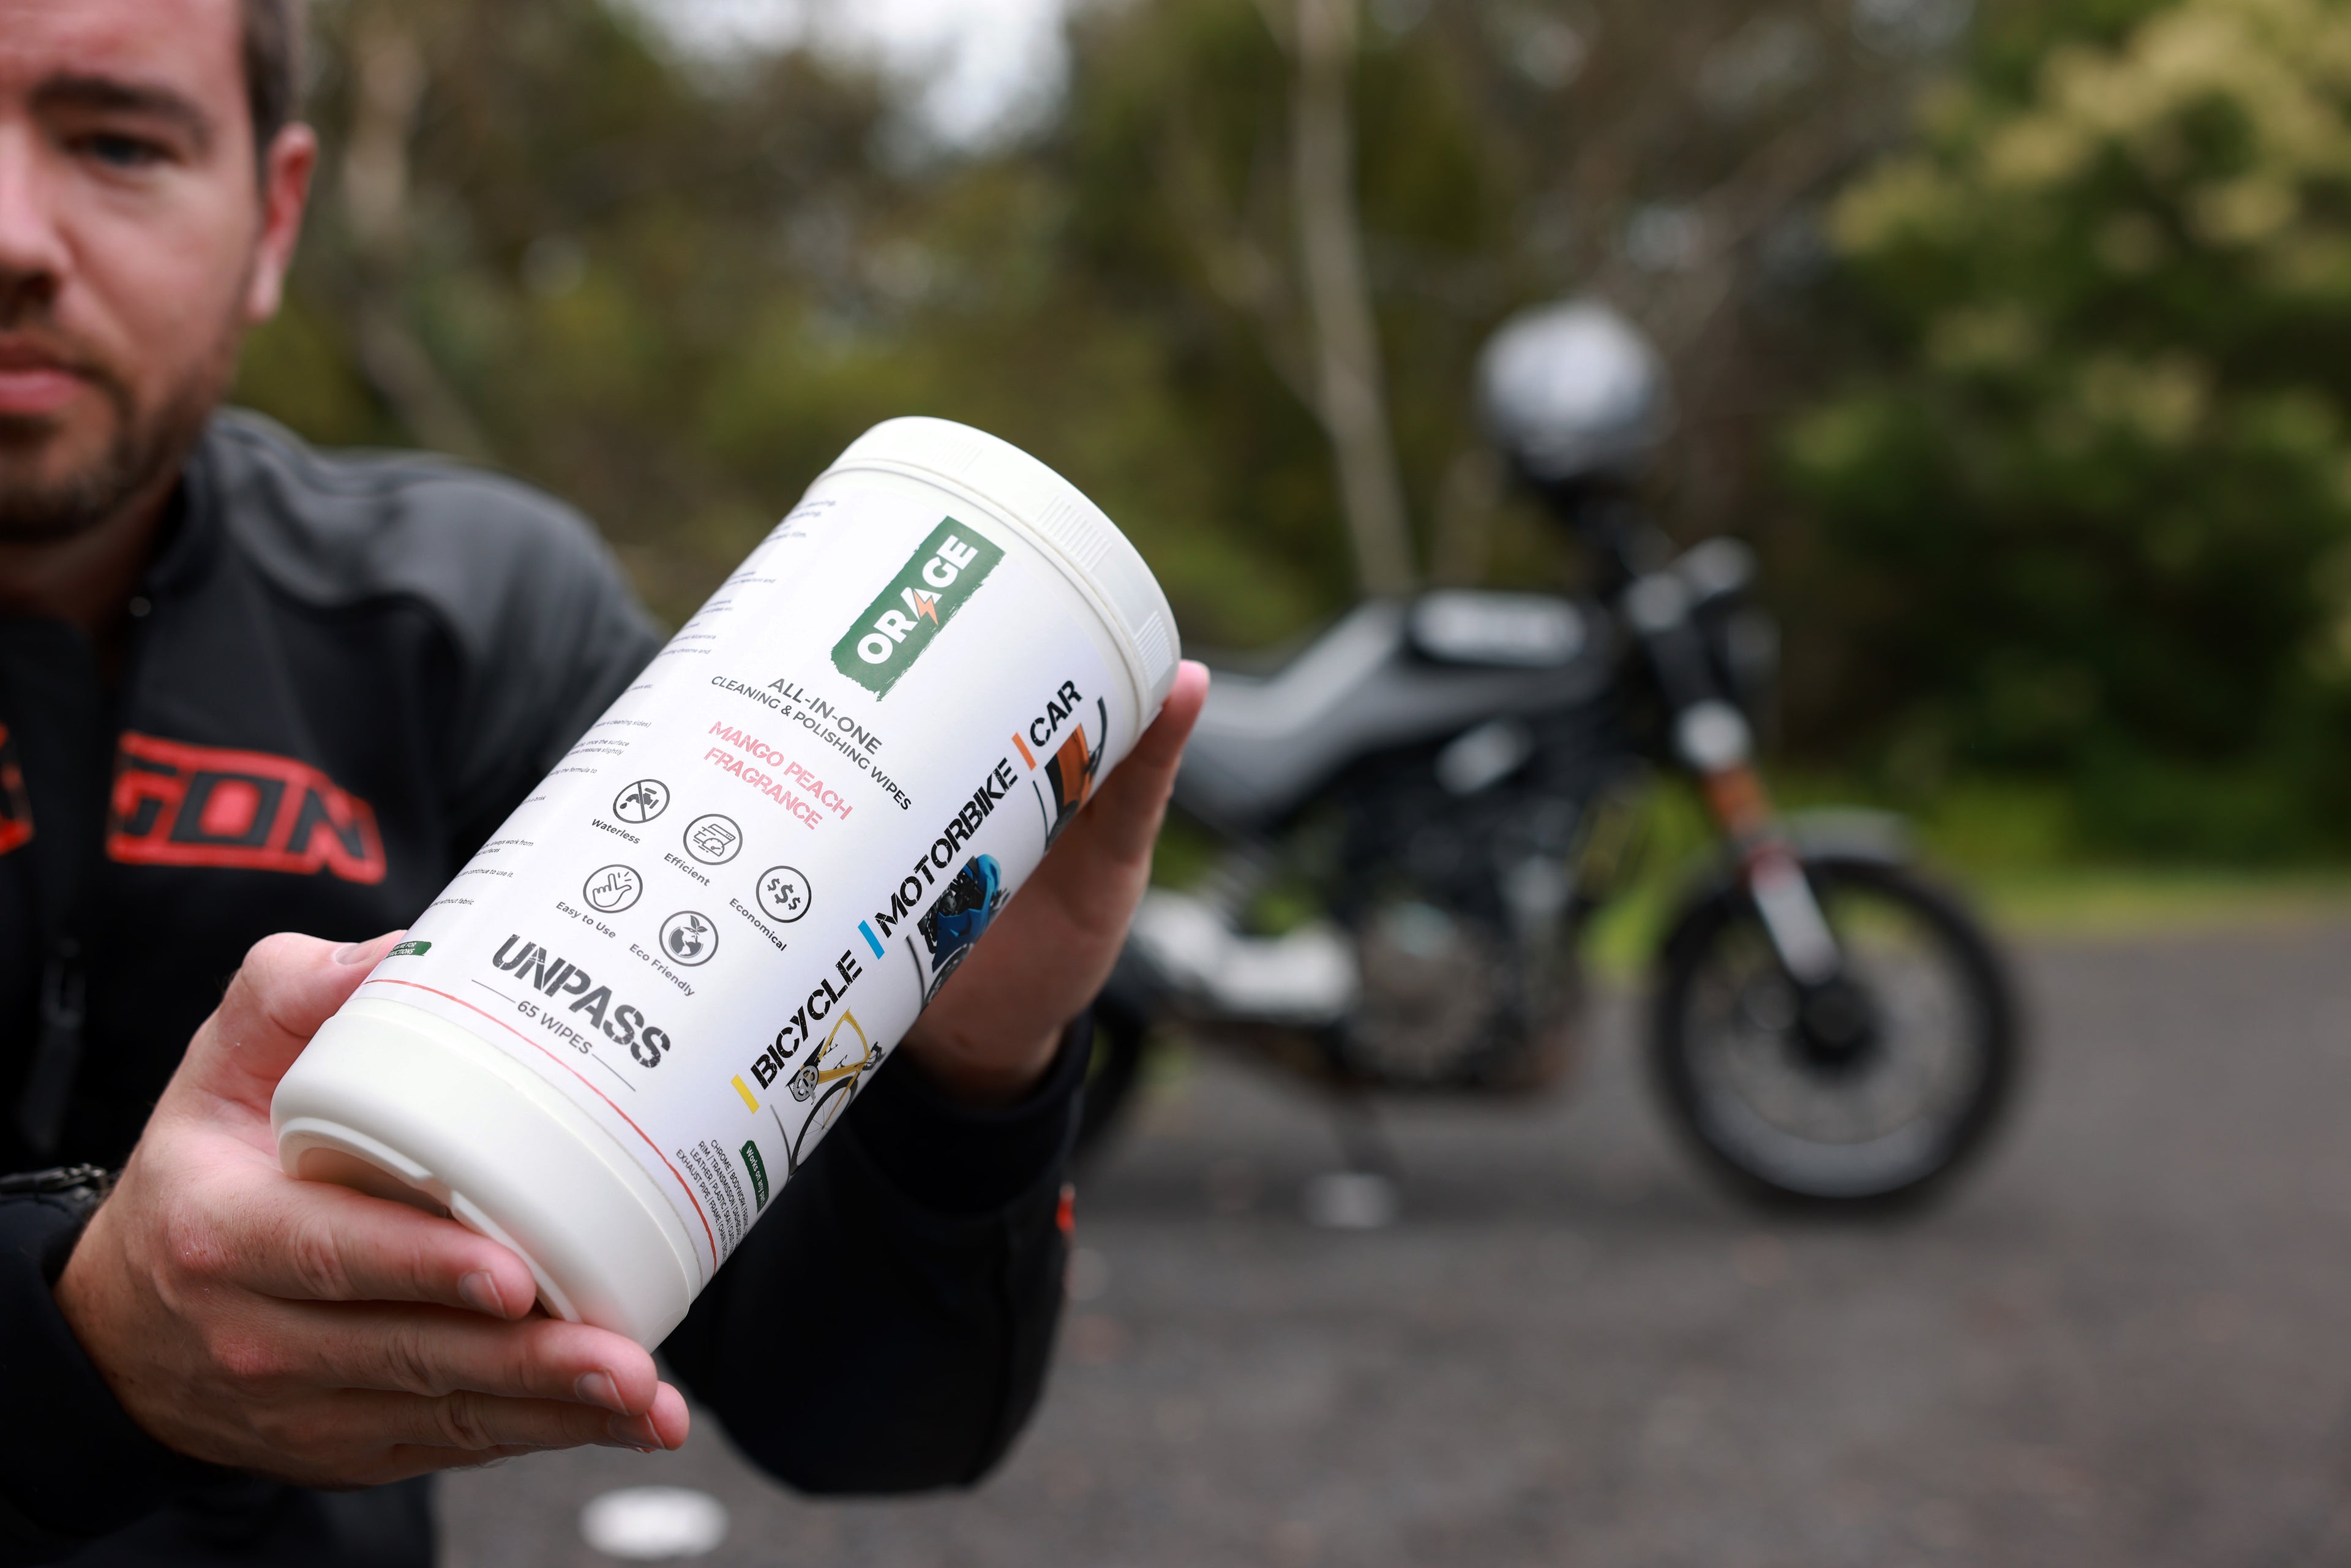 Load video: Looking for an all-in-one waterless cleaning solution for your motorcycle, look no further than the Unpass Orage All-In-One Cleaning &amp; Polishing Wipes. Unpass Australia sent me out some to test and I&#39;ve come away highly impressed.